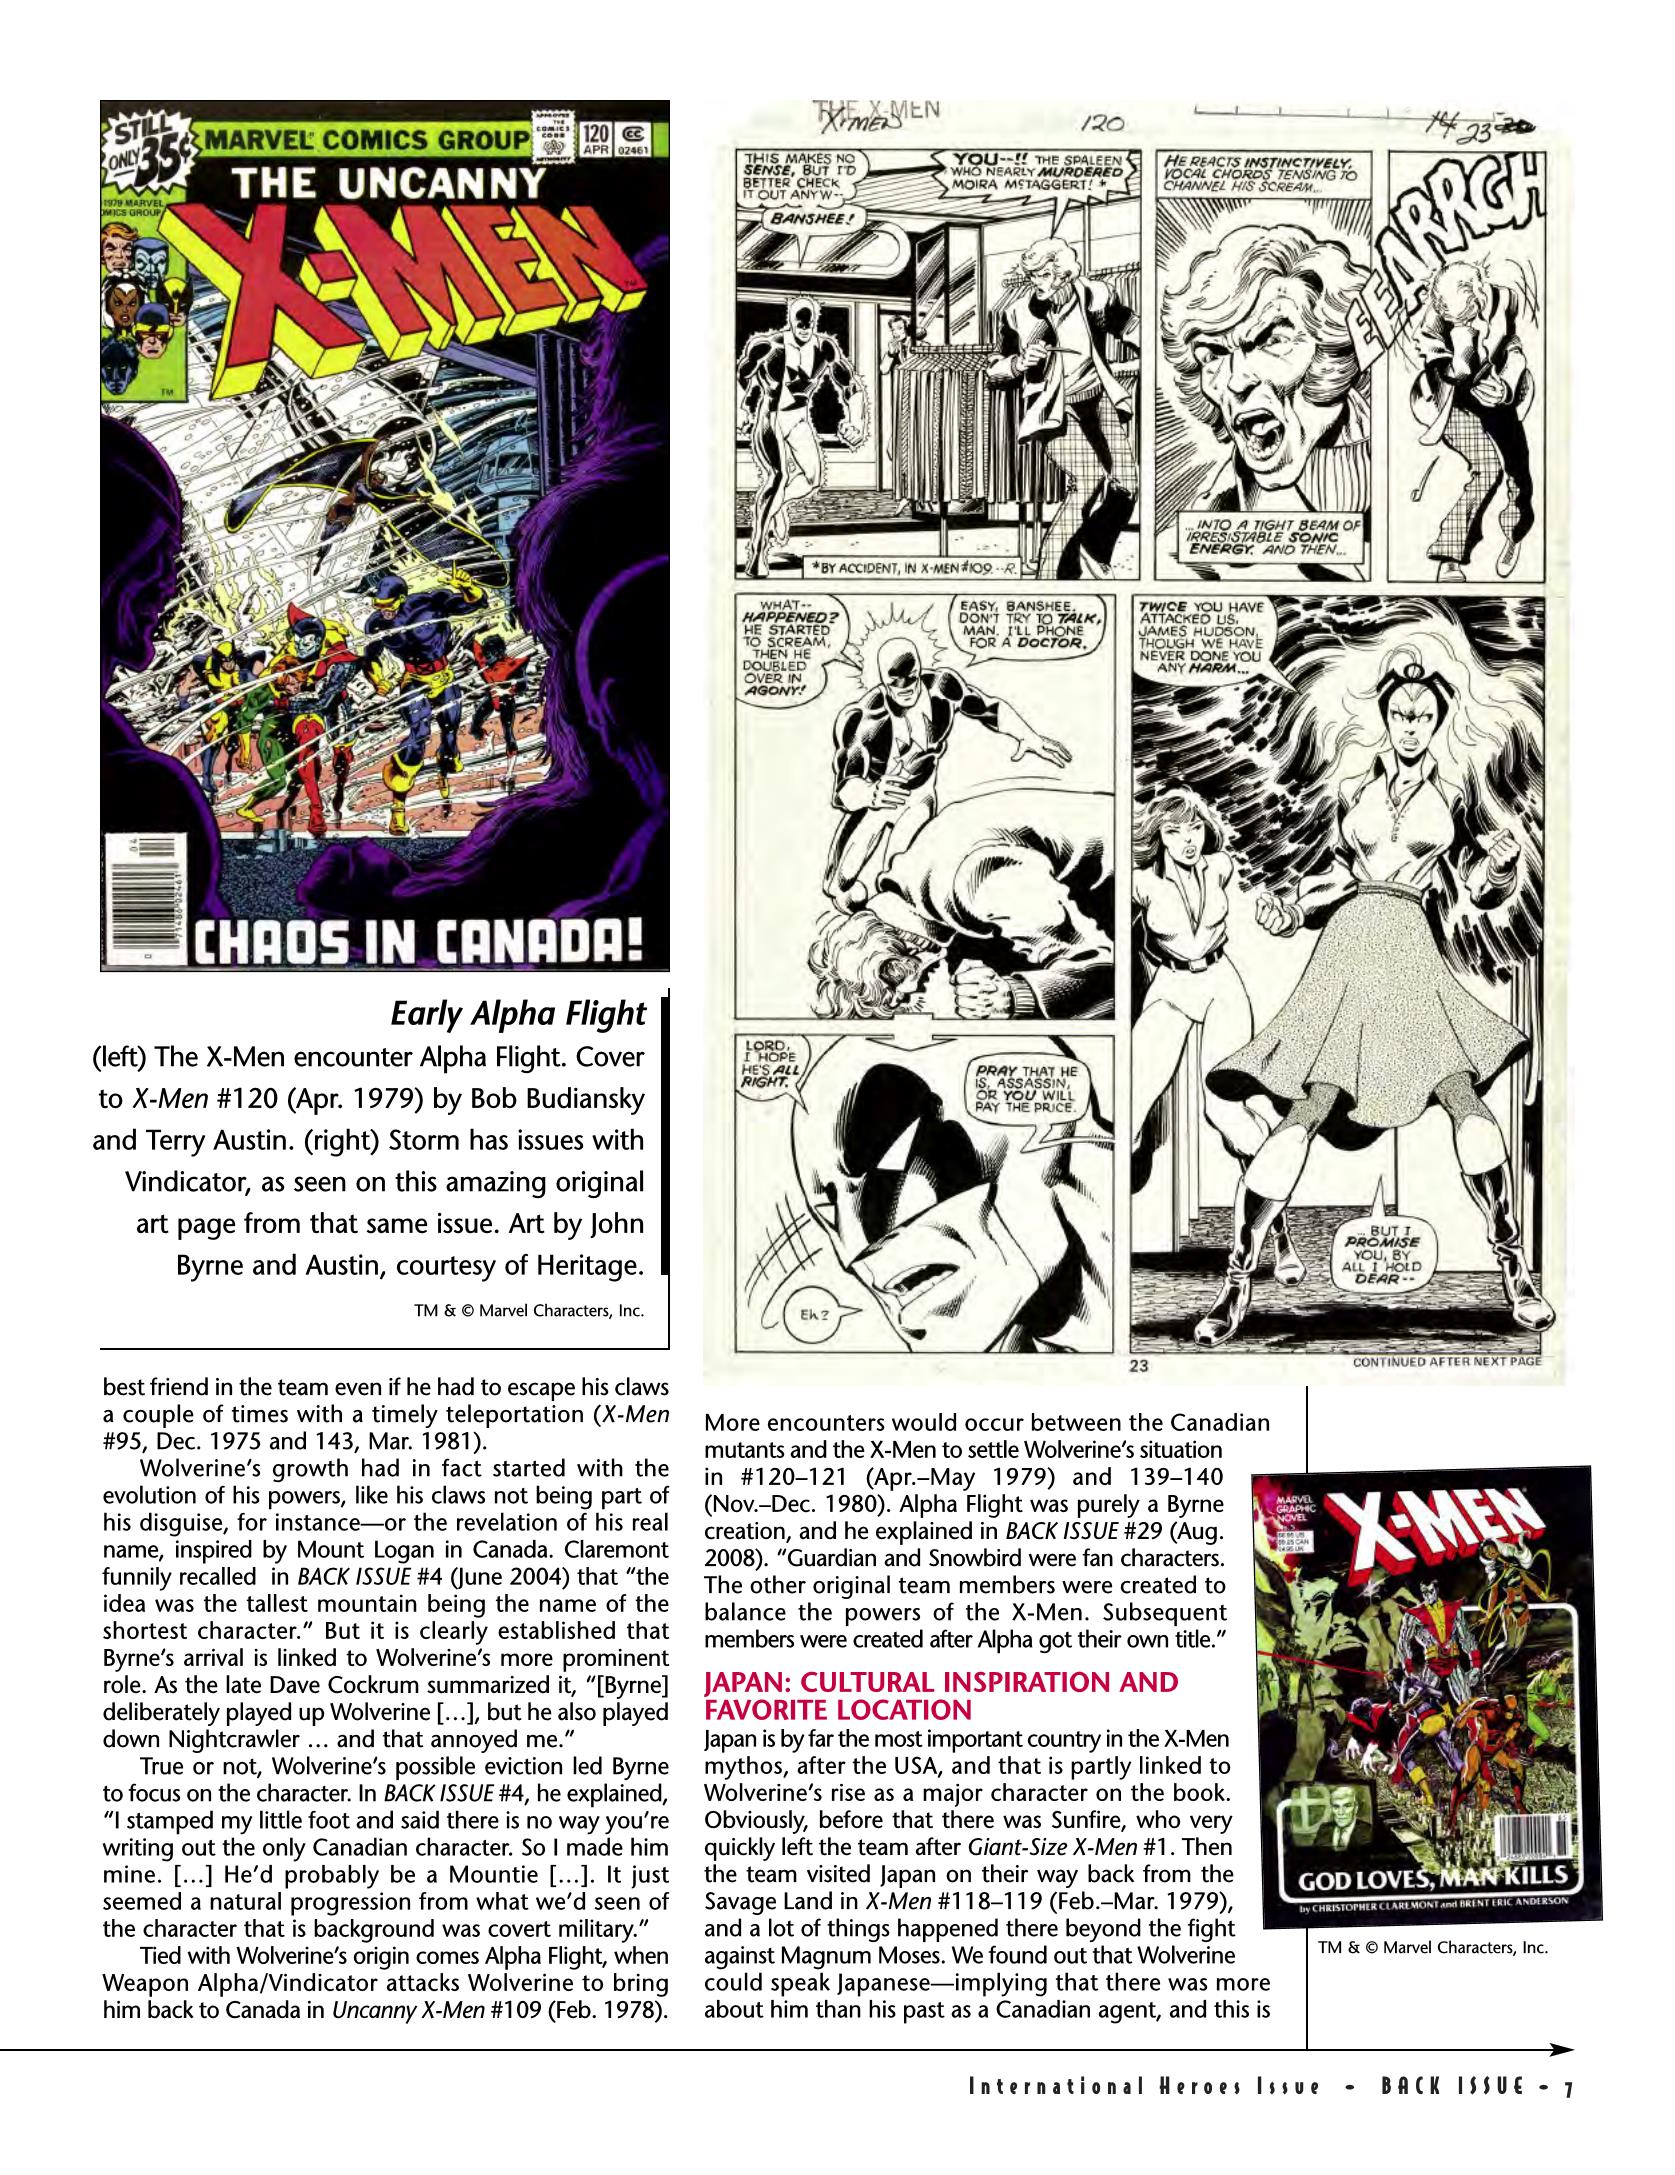 Read online Back Issue comic -  Issue #83 - 9